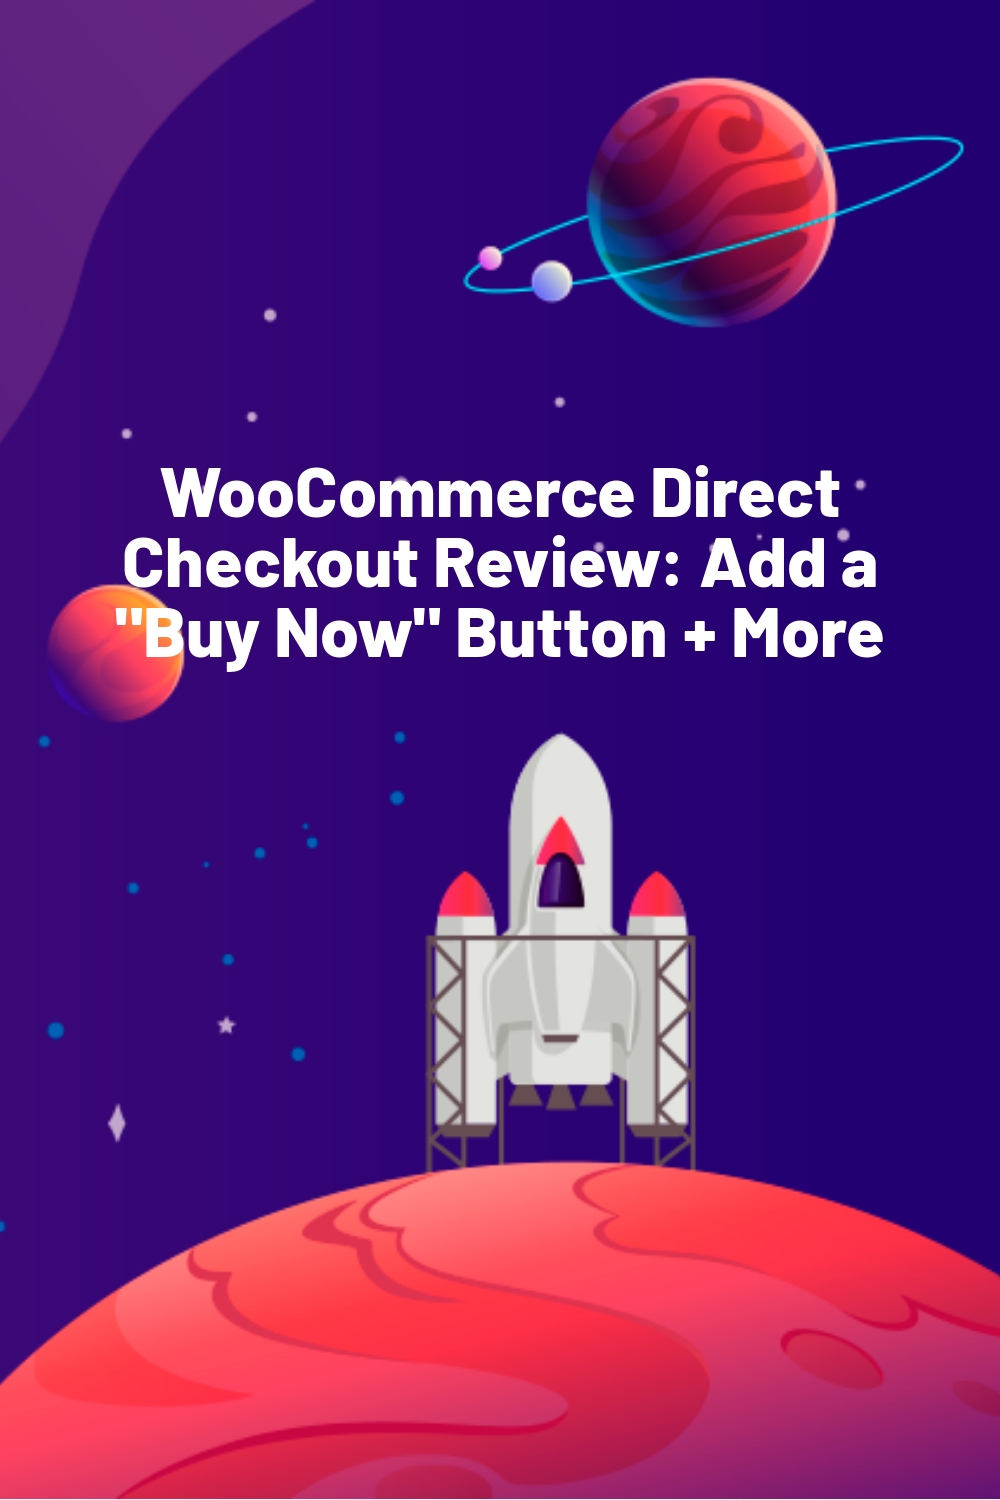 WooCommerce Direct Checkout Review: Add a “Buy Now” Button + More